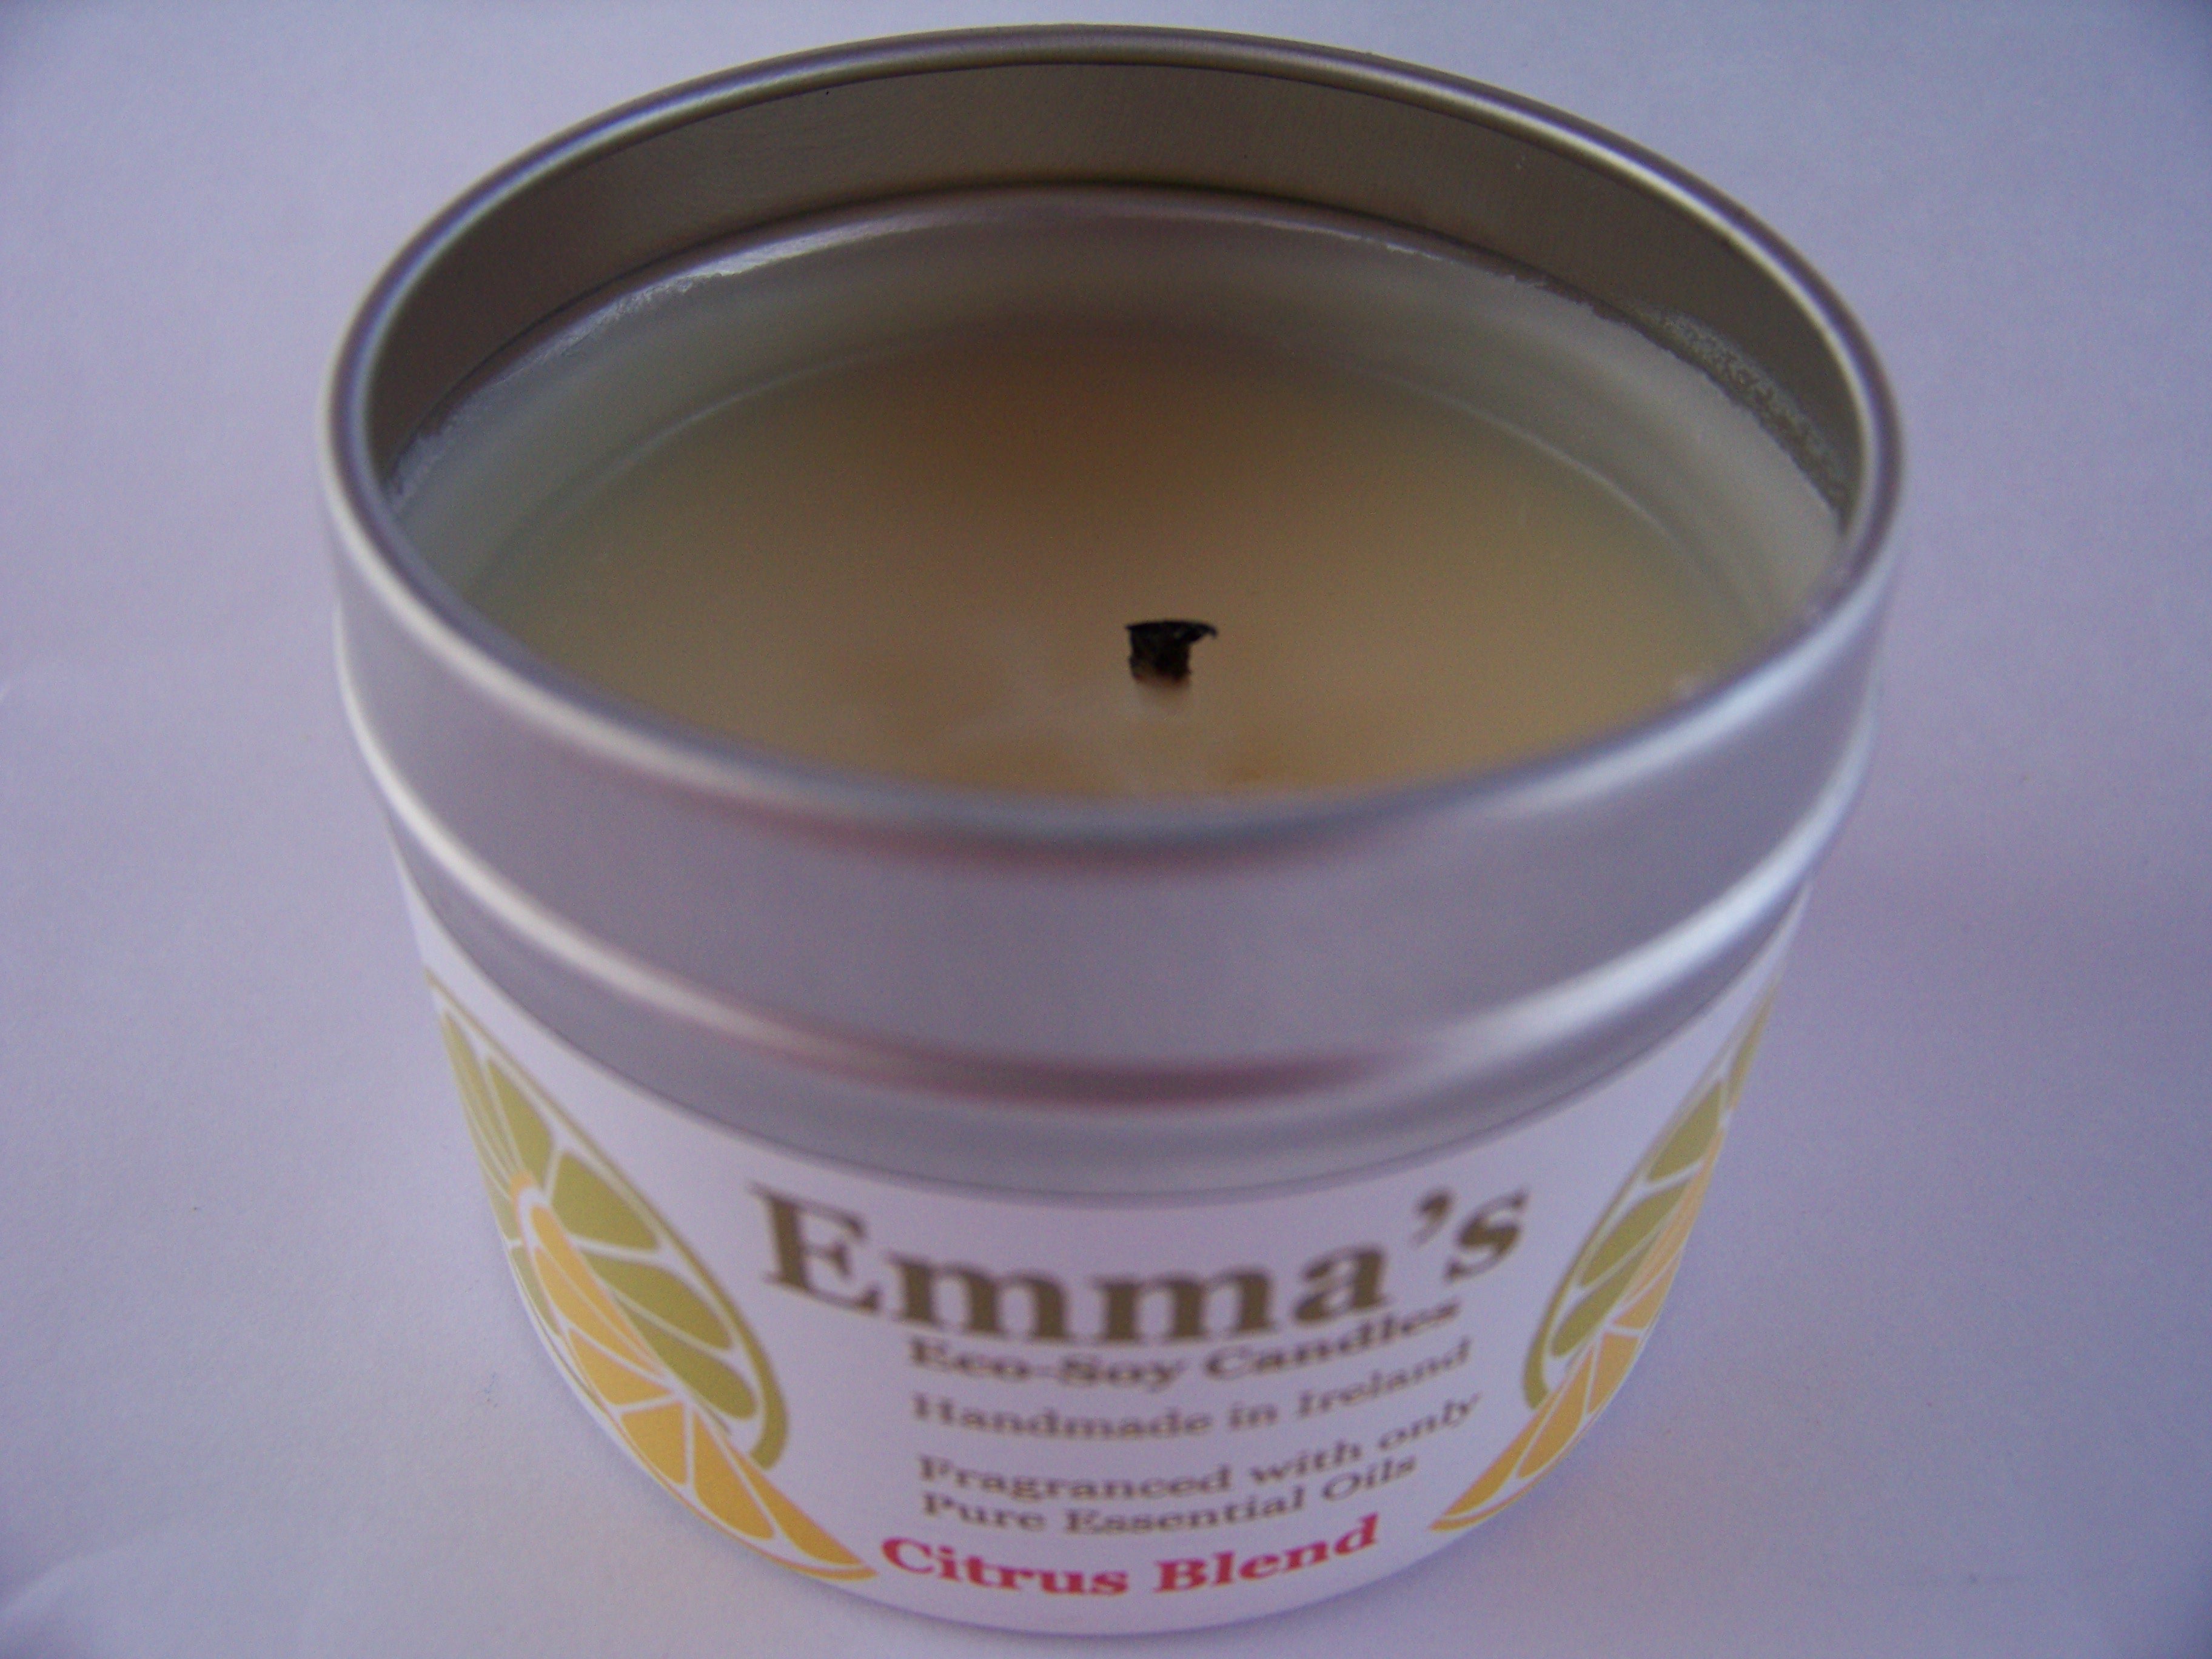 Emma's So Naturals Candle with wick correctly trimmed.